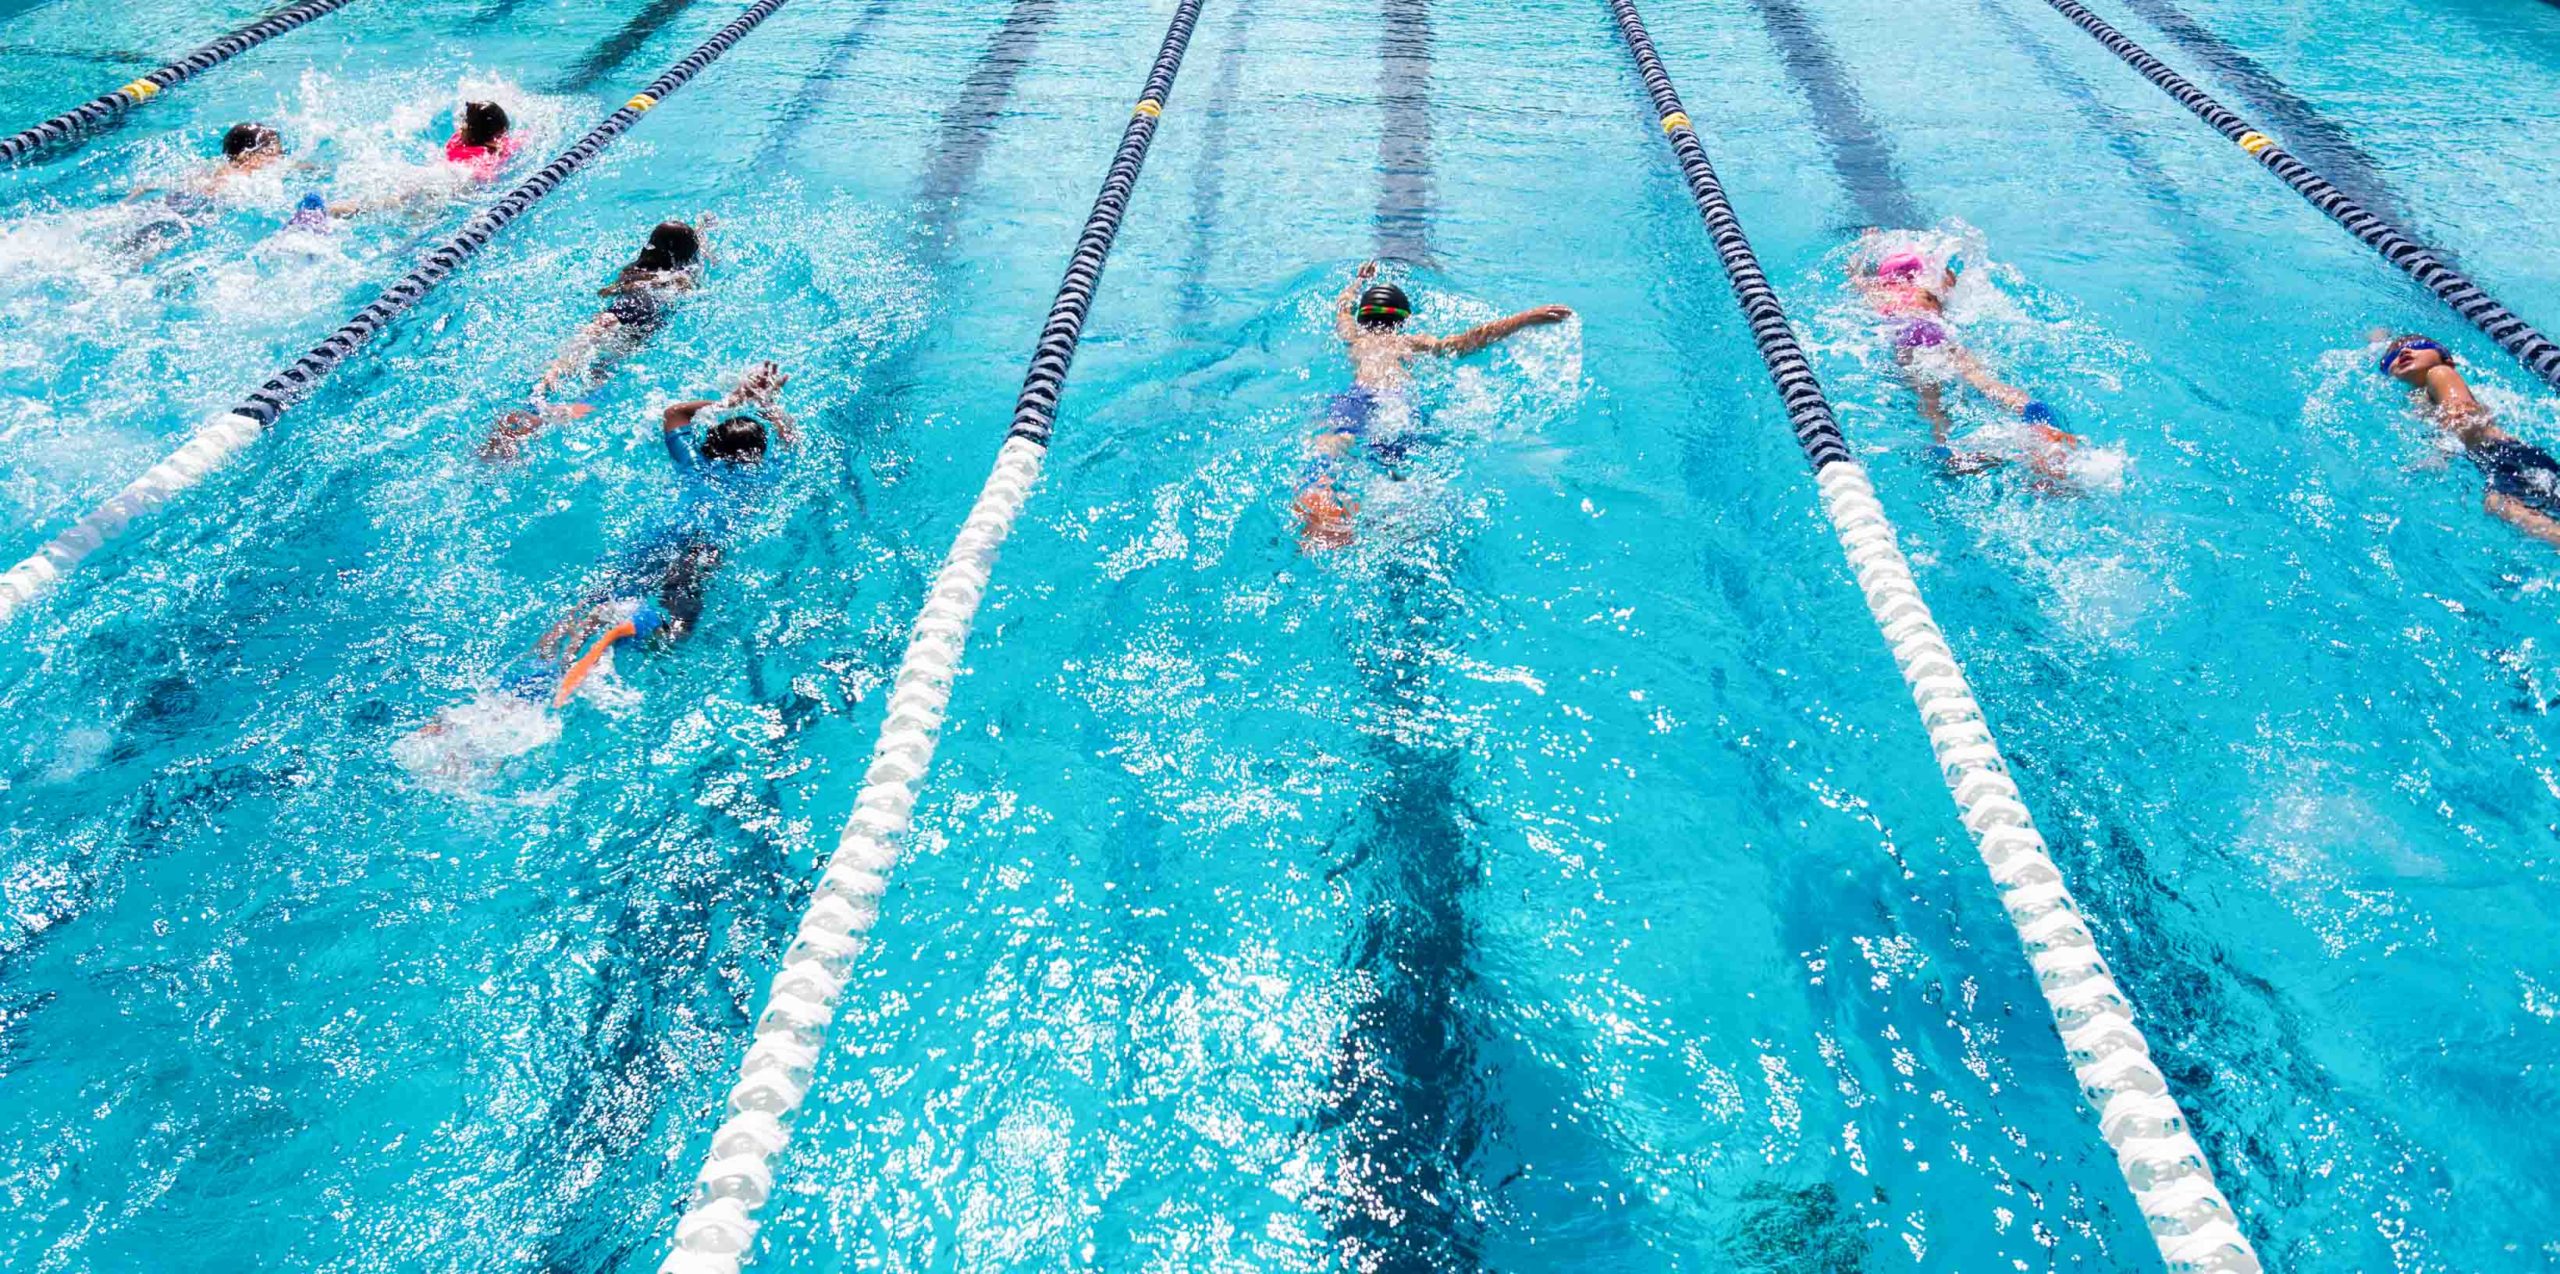 Middle school students swimming in lanes